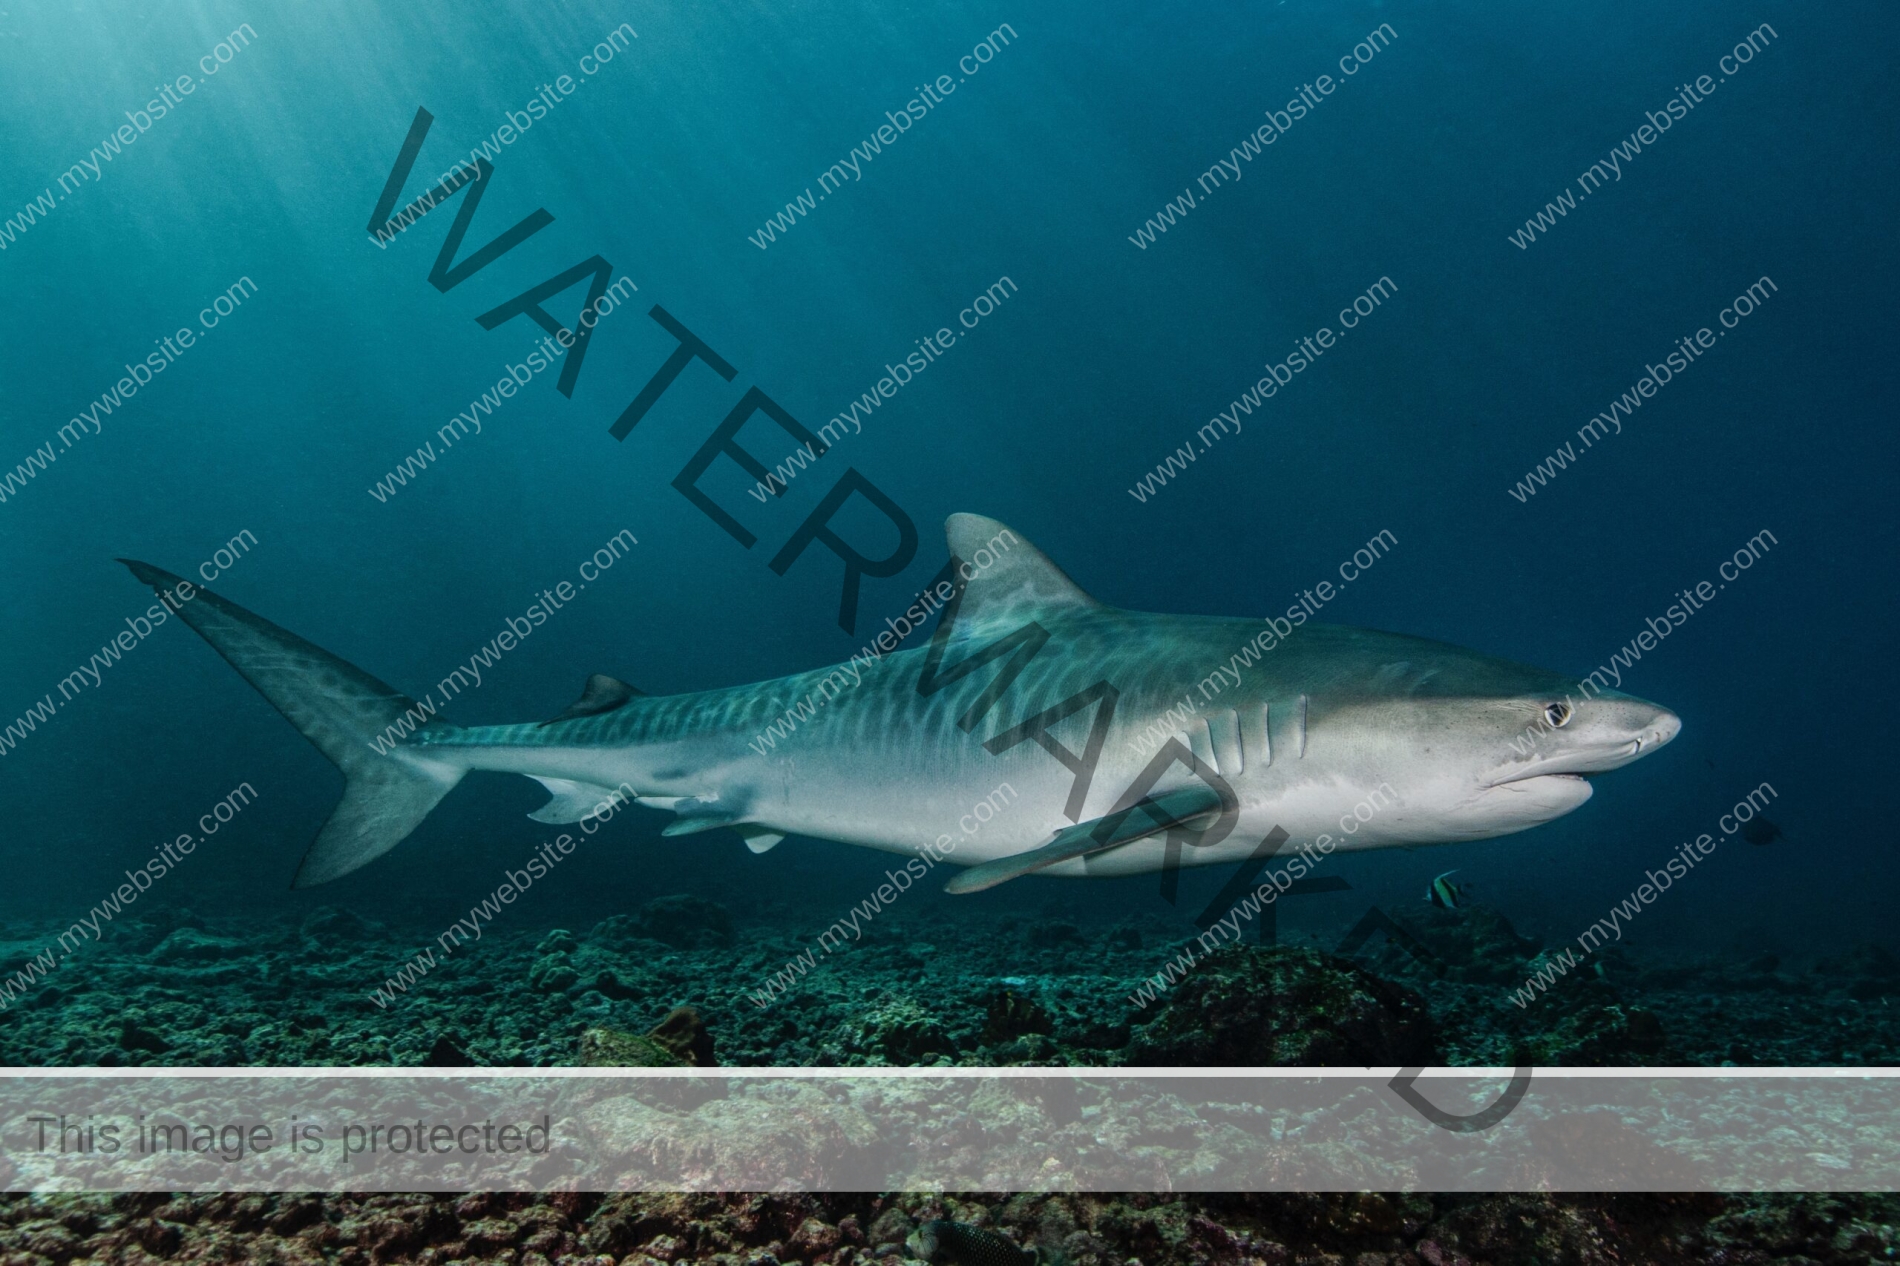 Tiger shark Cocos Island photograph taken by Edwar Herreno. You can see the side view of the shark as it swims past Herreno.